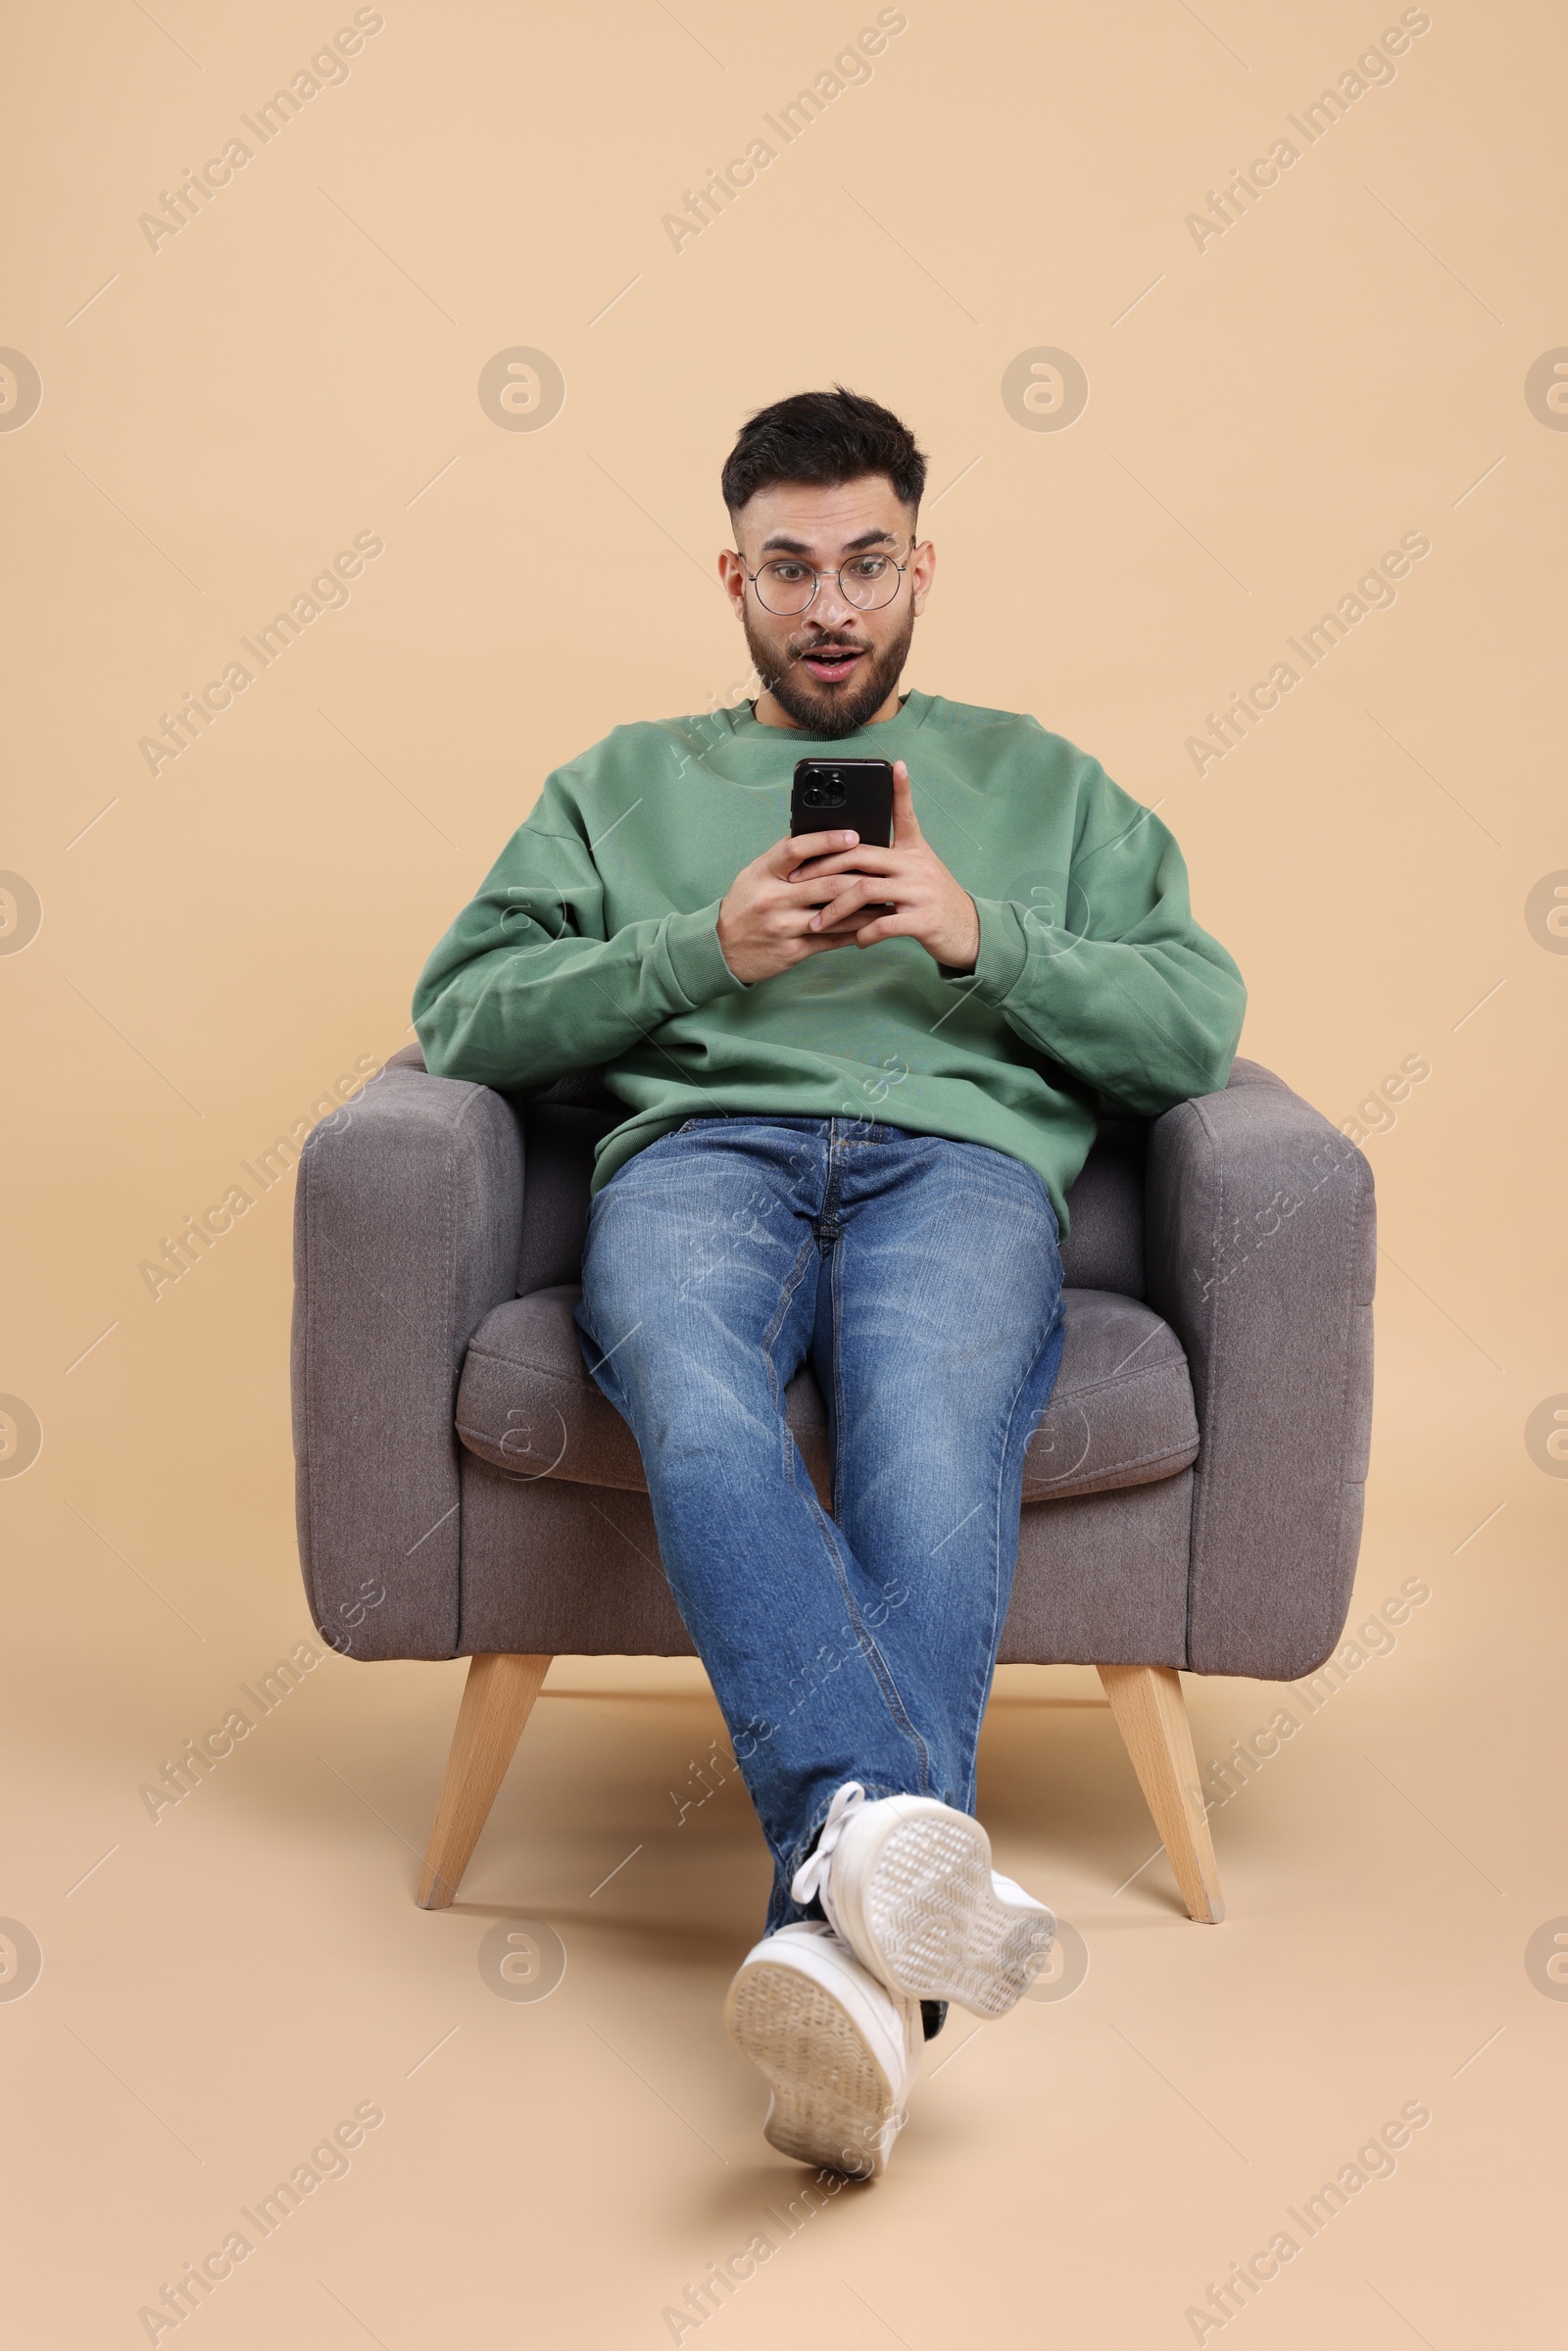 Photo of Emotional young man using smartphone in armchair on beige background